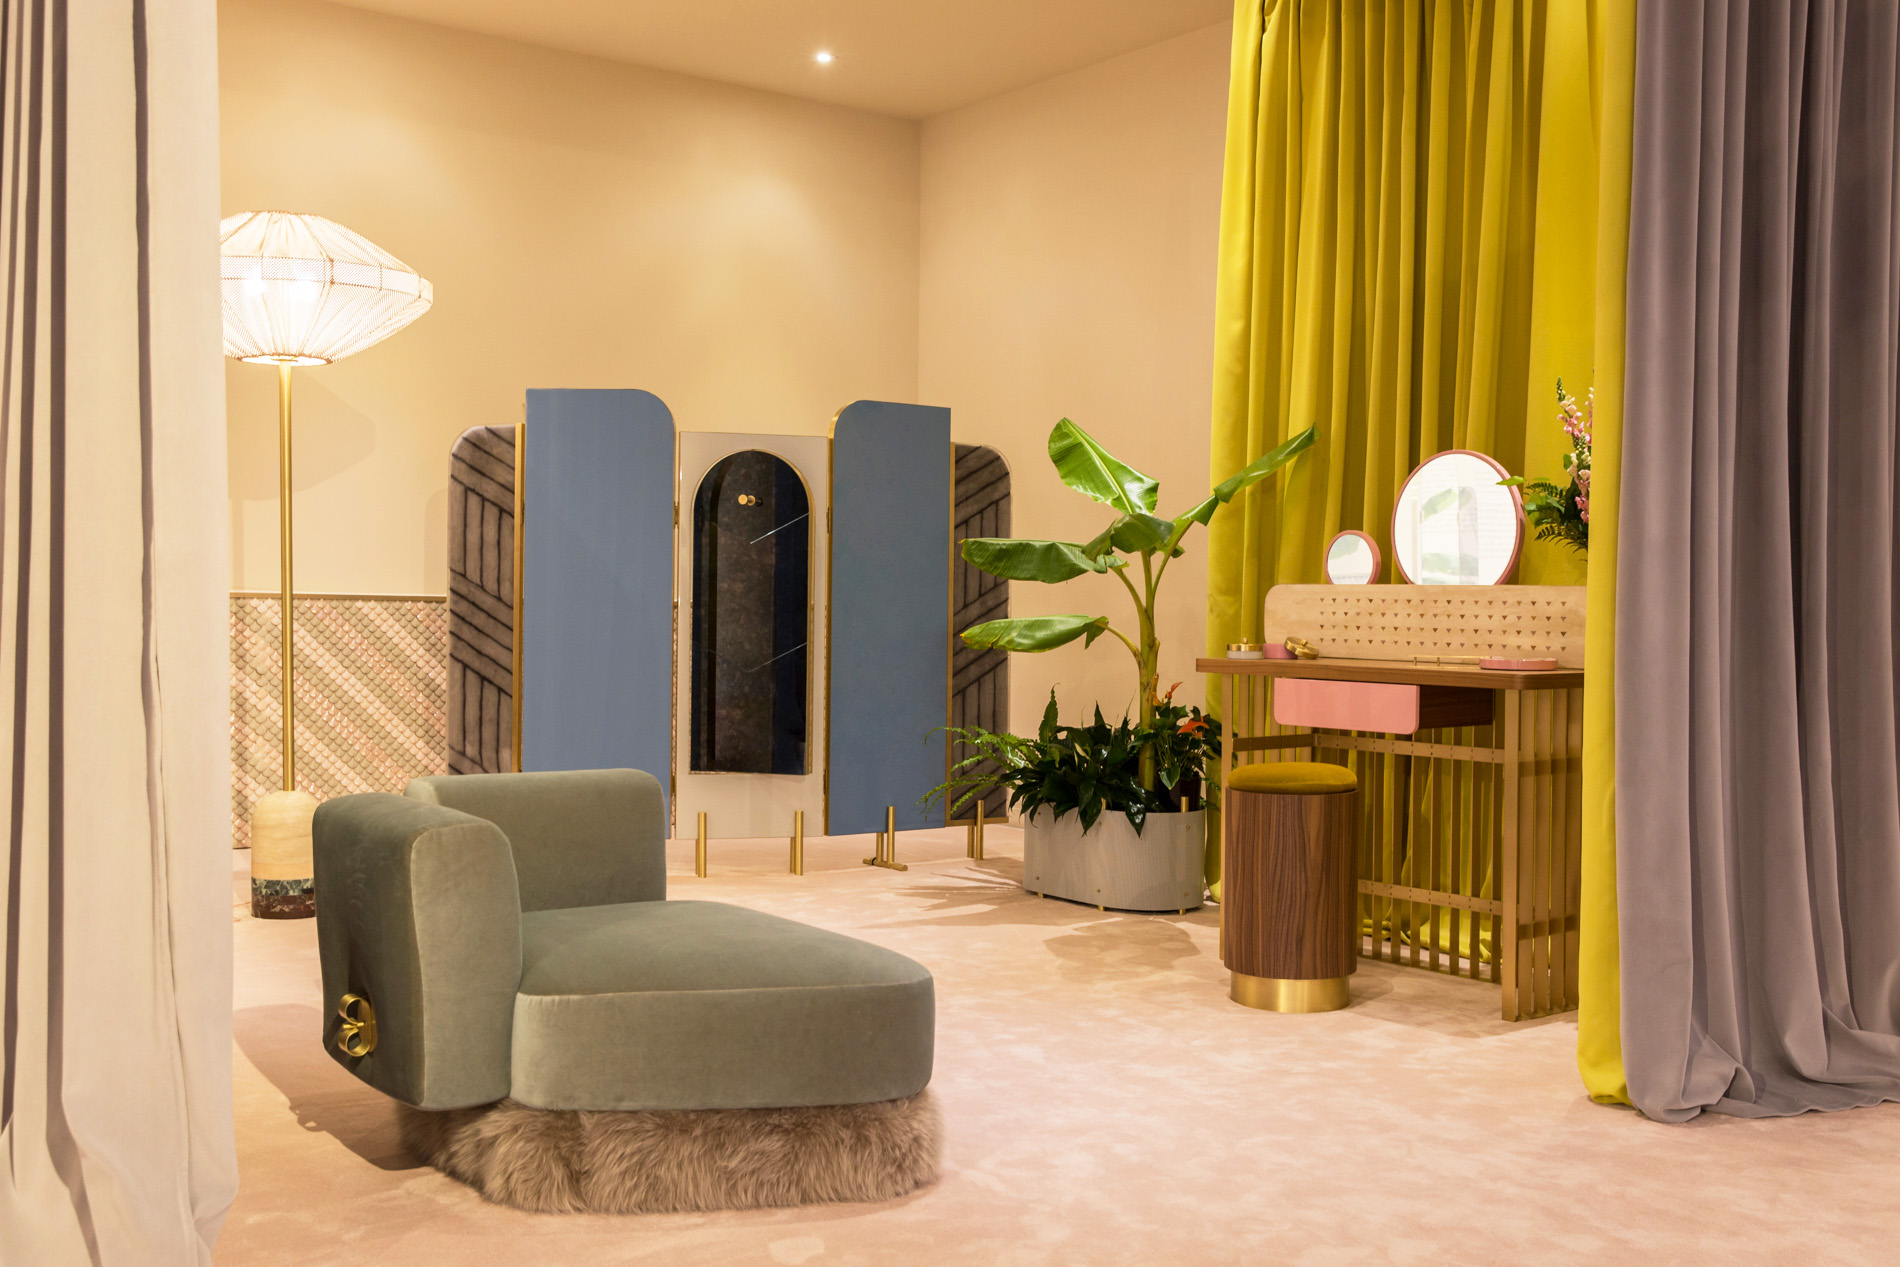 The Happy Room furniture collection and Both Set-Up at DesignMiami/ 2016 for FENDI